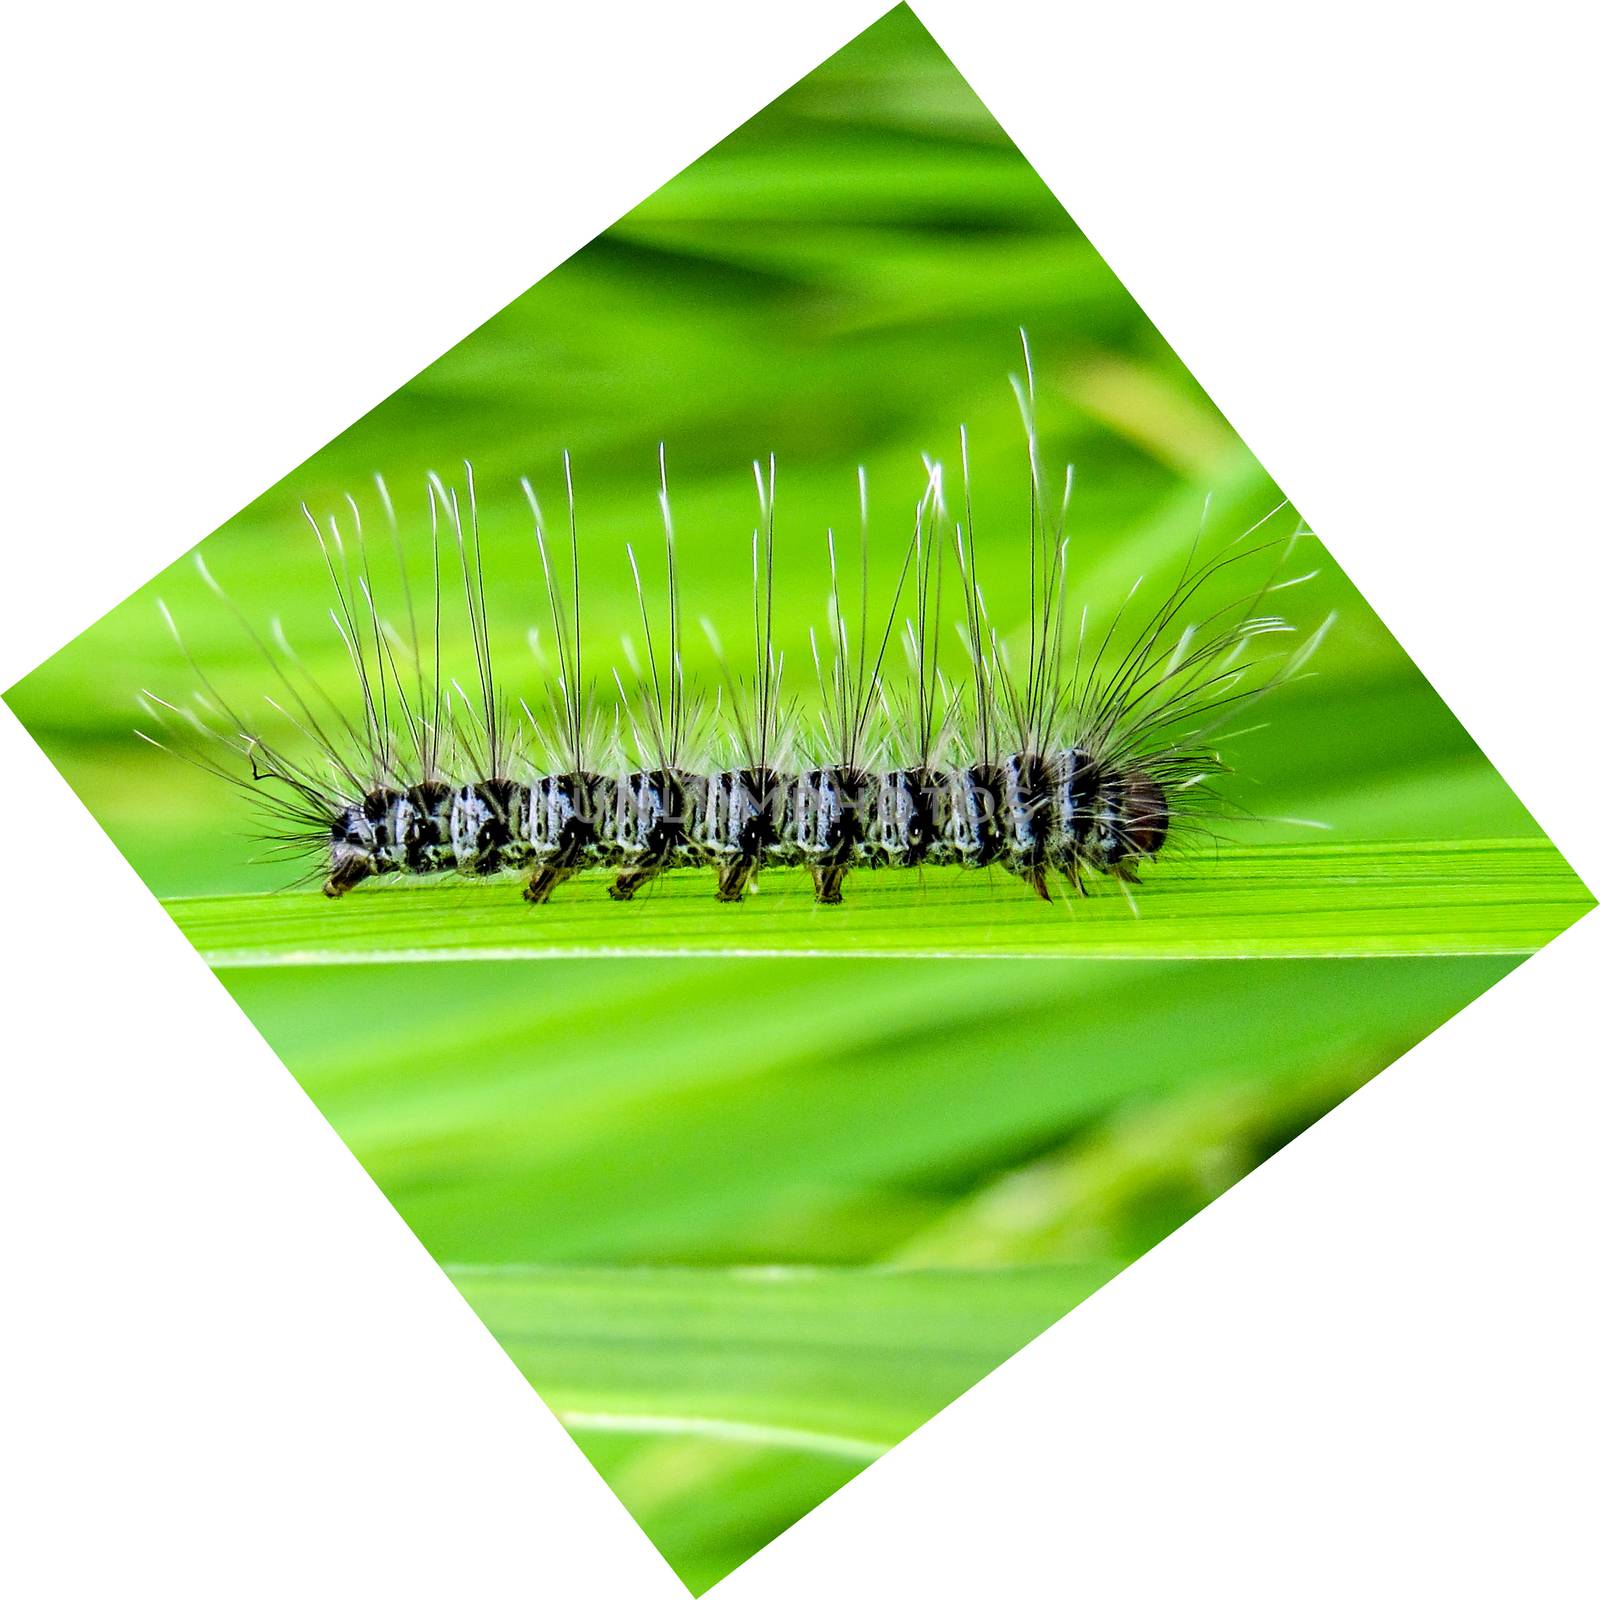 Diamond shaped image of a black and white caterpillar on a green leaf in the village.